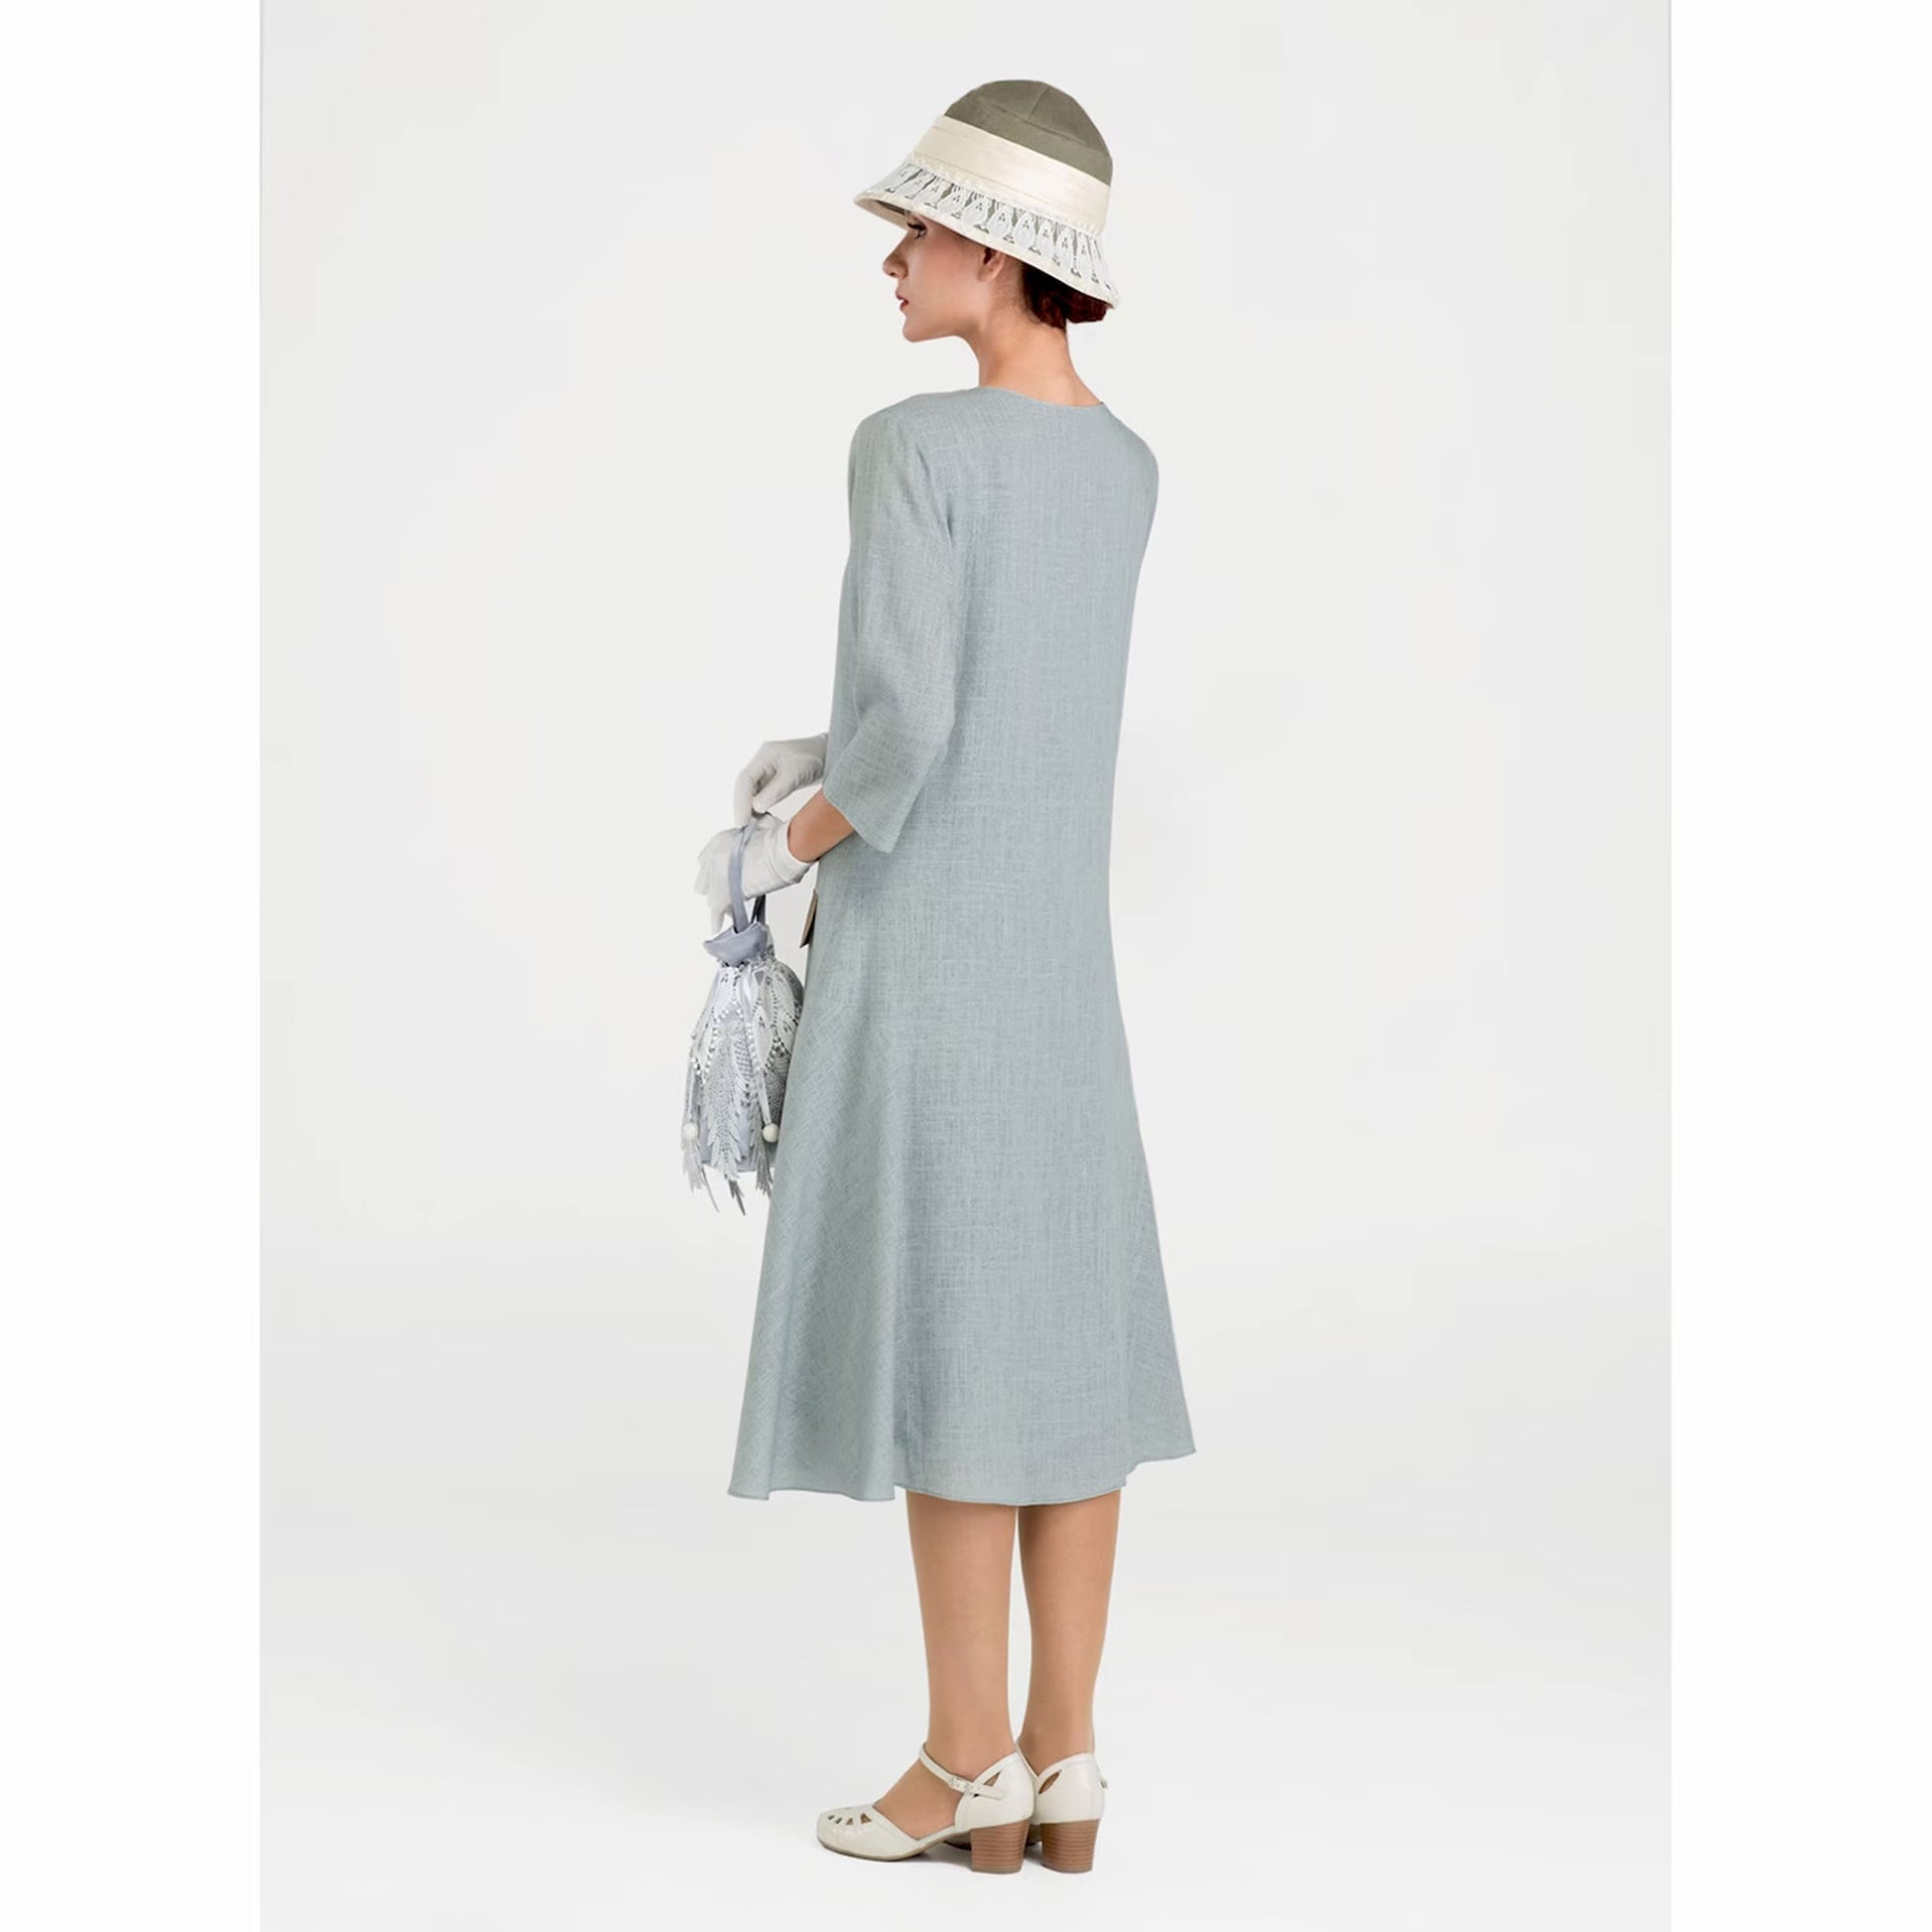 Roaring twenties dress in grey quality linen and with 3/4 sleeves. Can be worn as a Great Gatsby dress, 1920s tea dress or an Art Deco dress. 